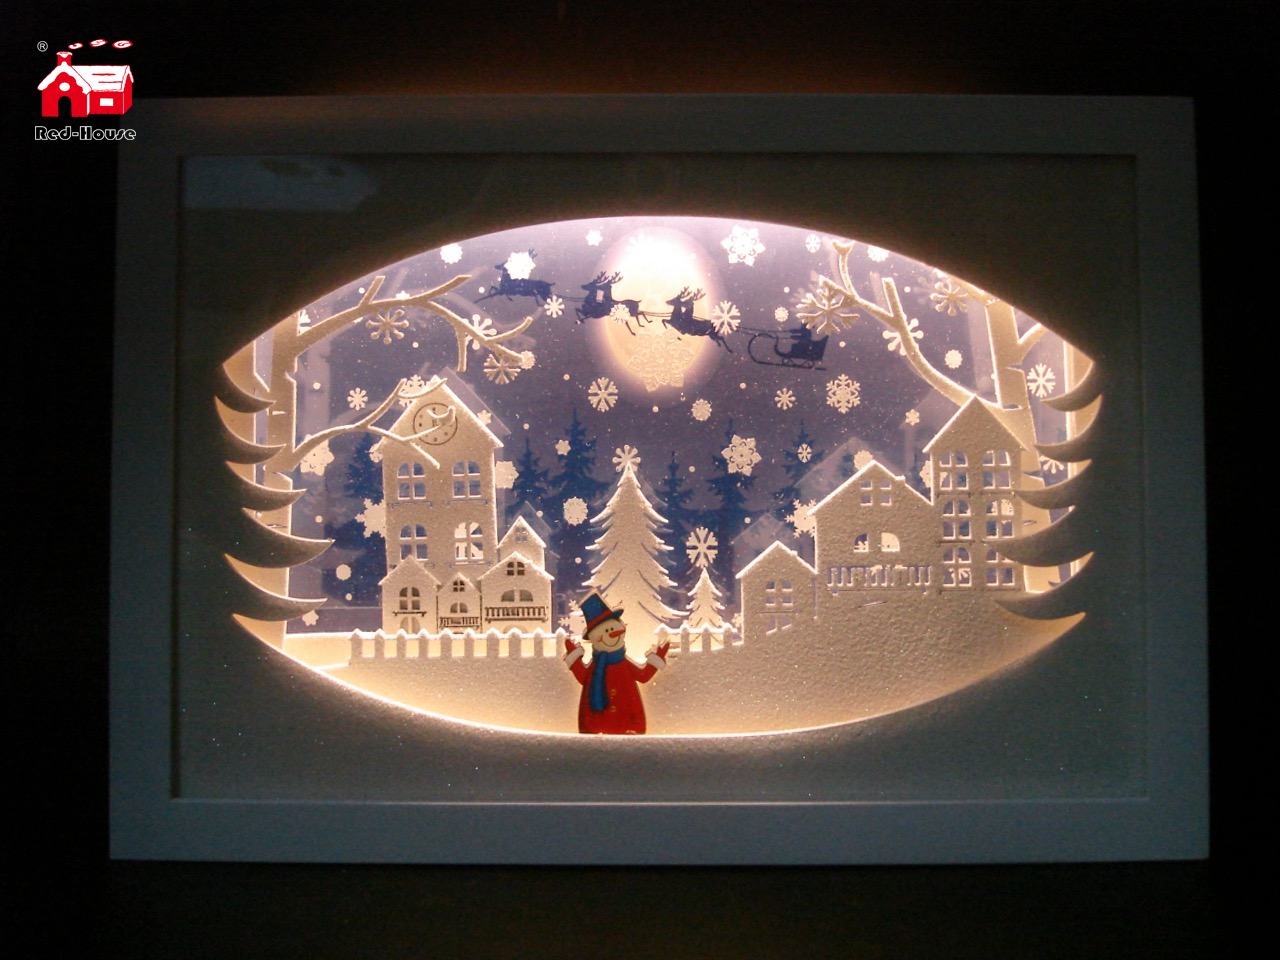 Christmas Decorative Horizontal Rectangle Frame Music Box As Led Home Decoration with Snow Flake Moving And Laser Cut Christmas Scene From Christmas Decoration Supplies